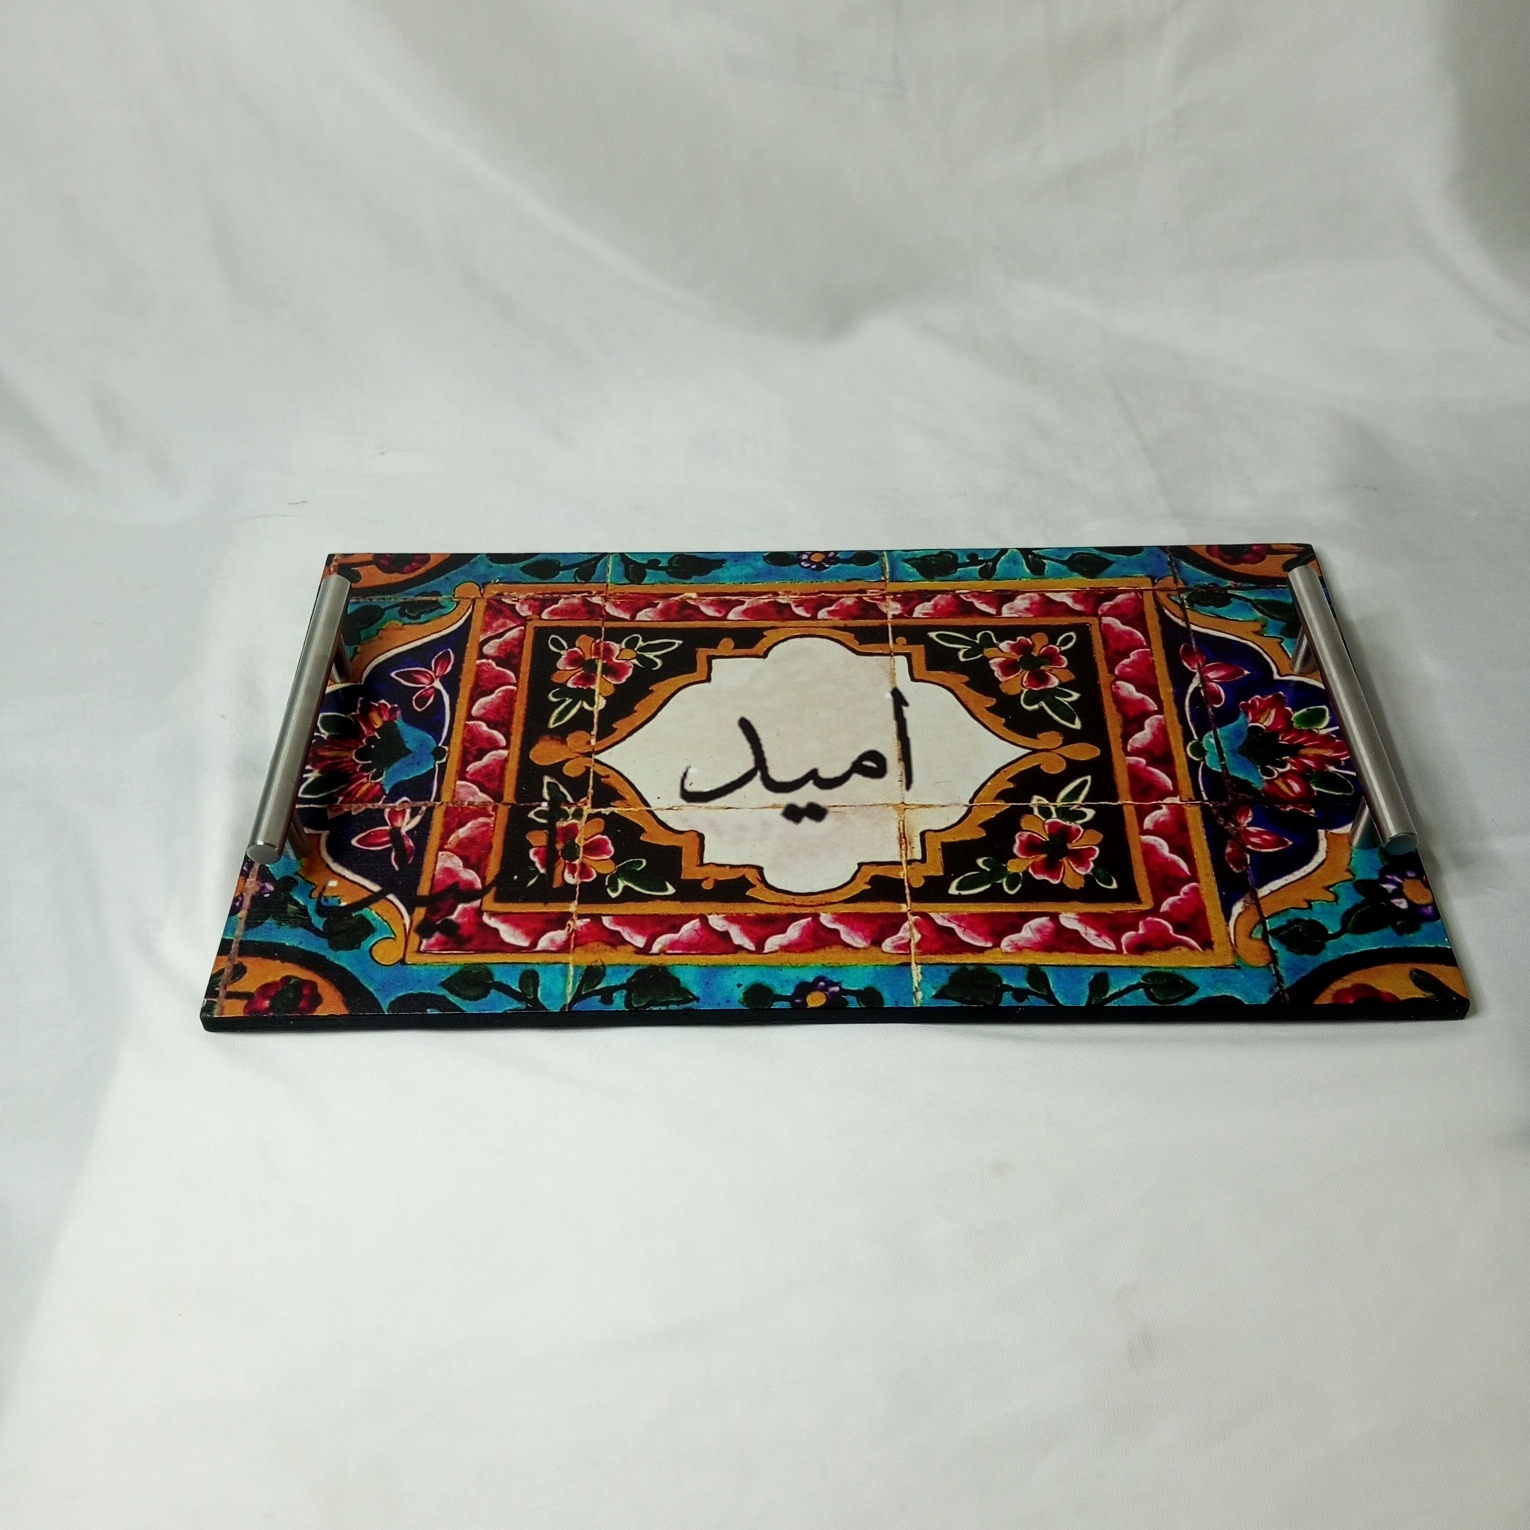 Wooden Tray with urdu calligraphy